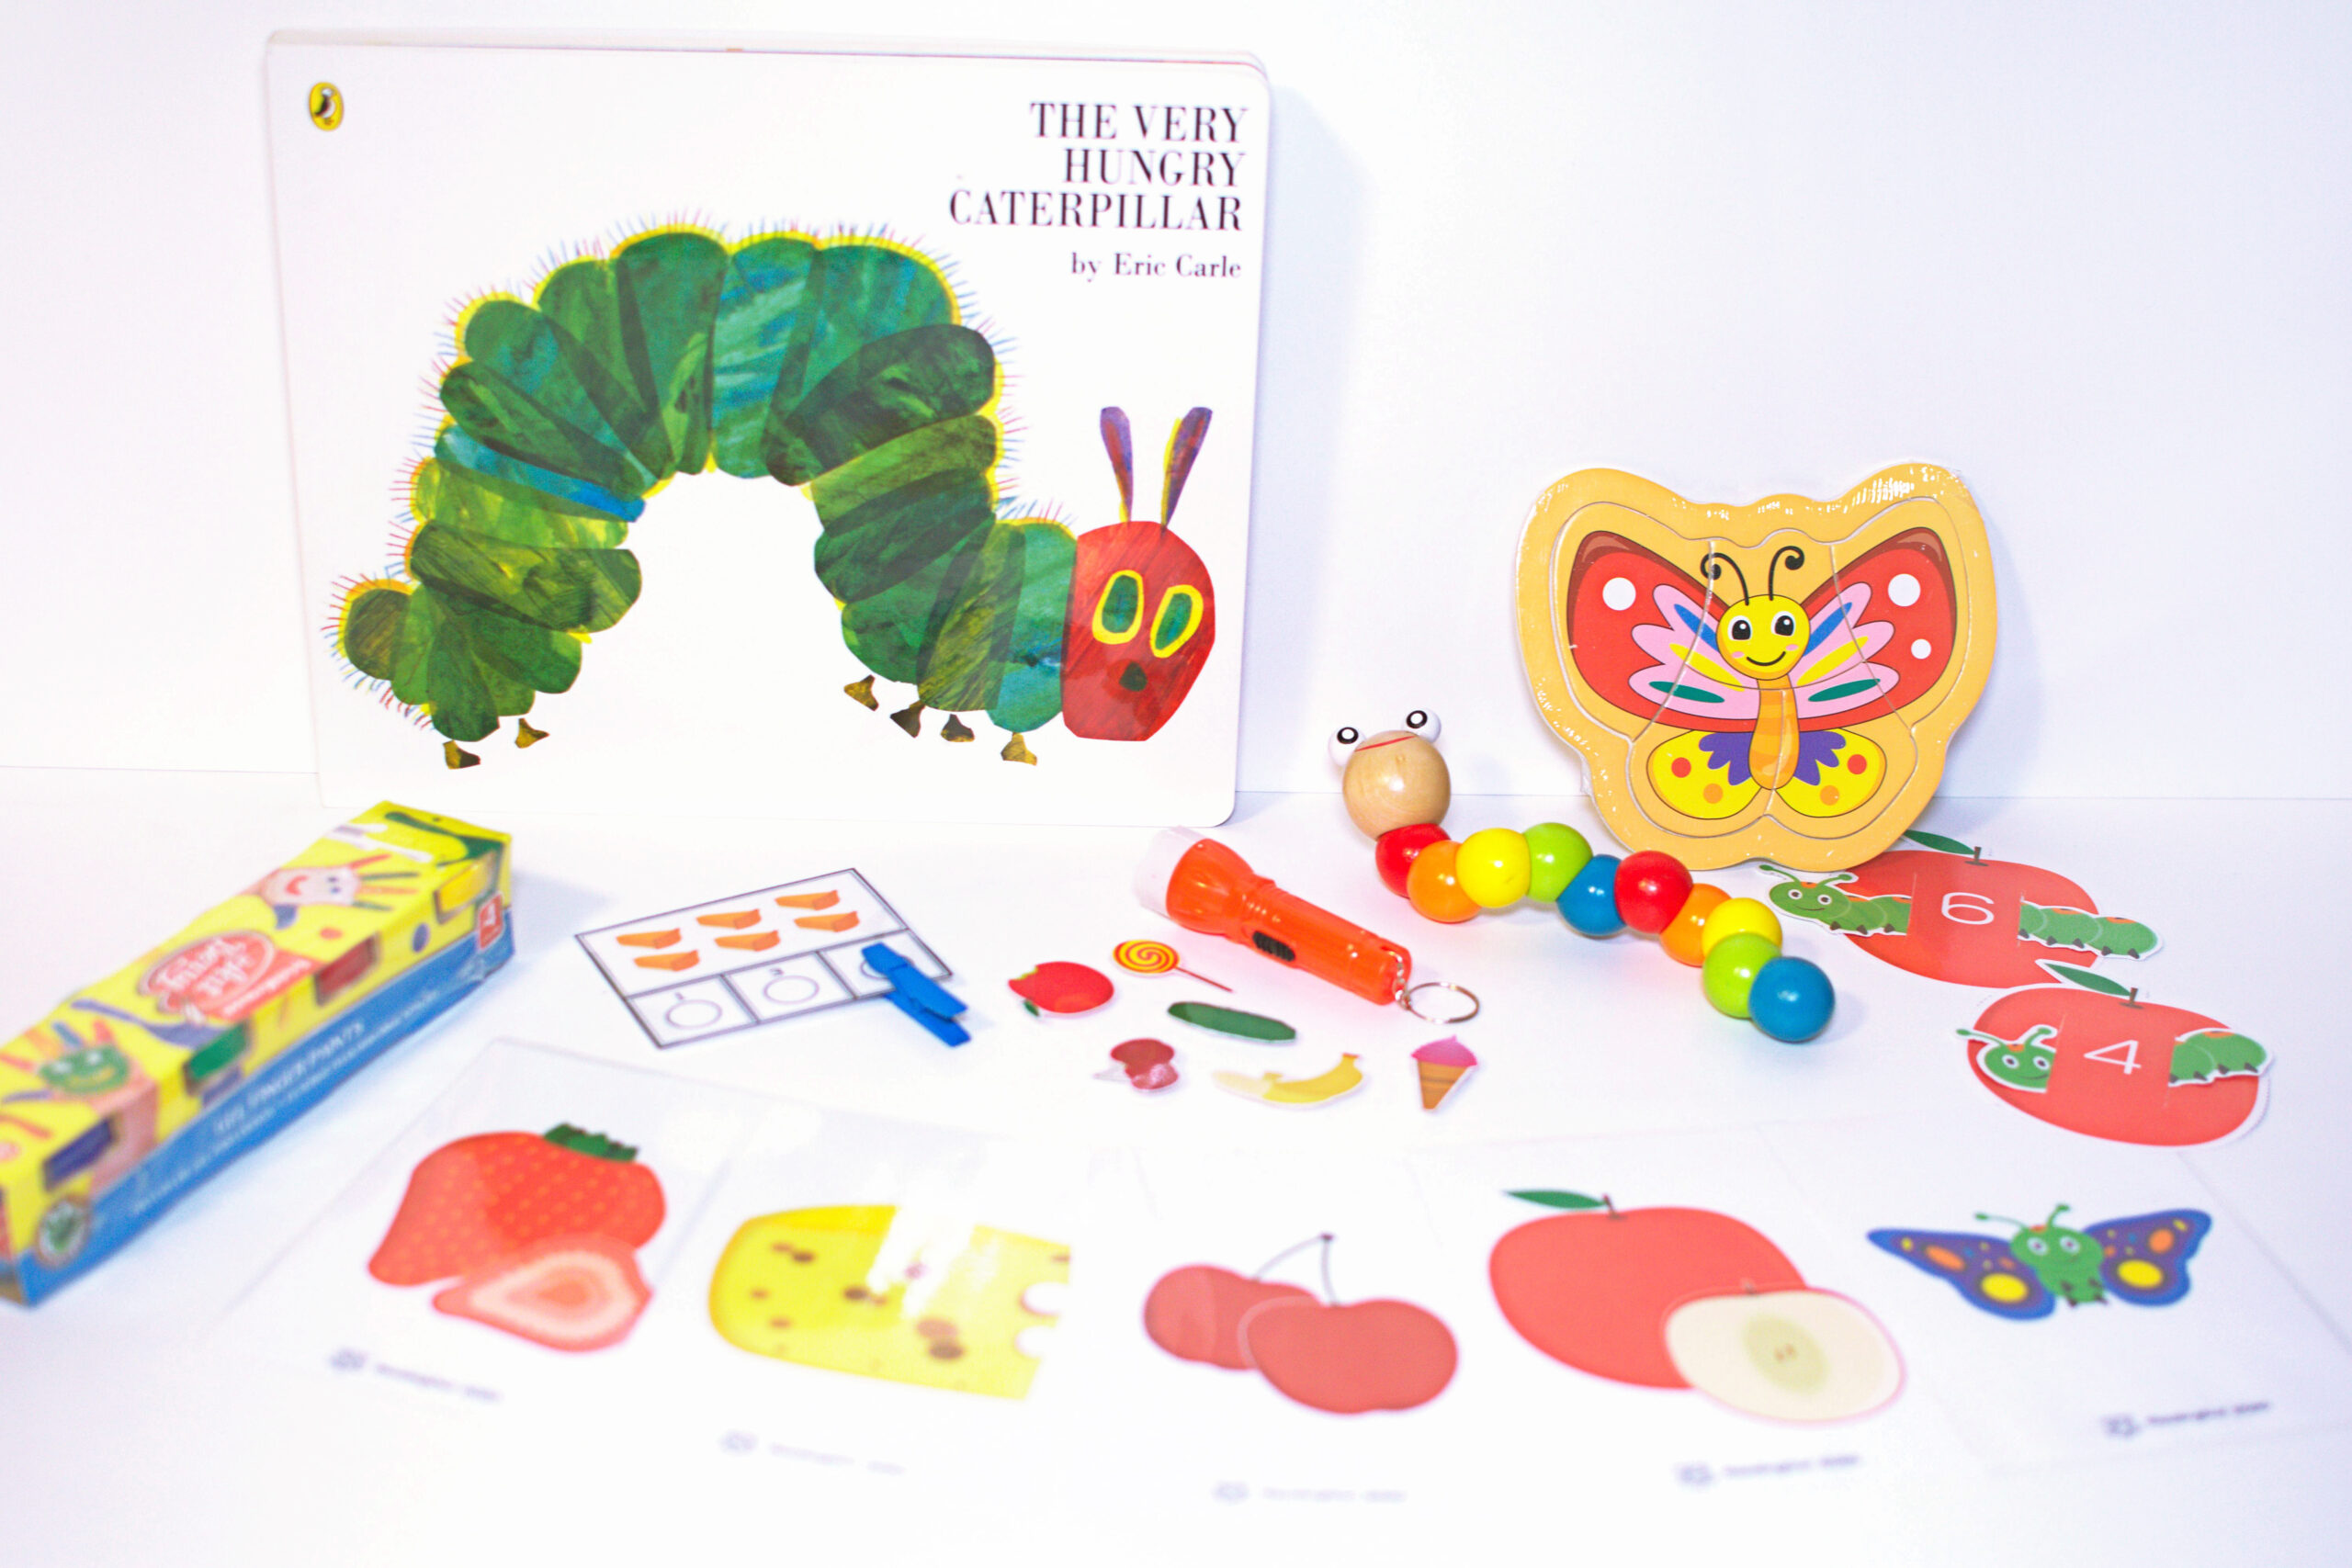 The Very Hungry Caterpillar's Very Big Colouring Book by Eric